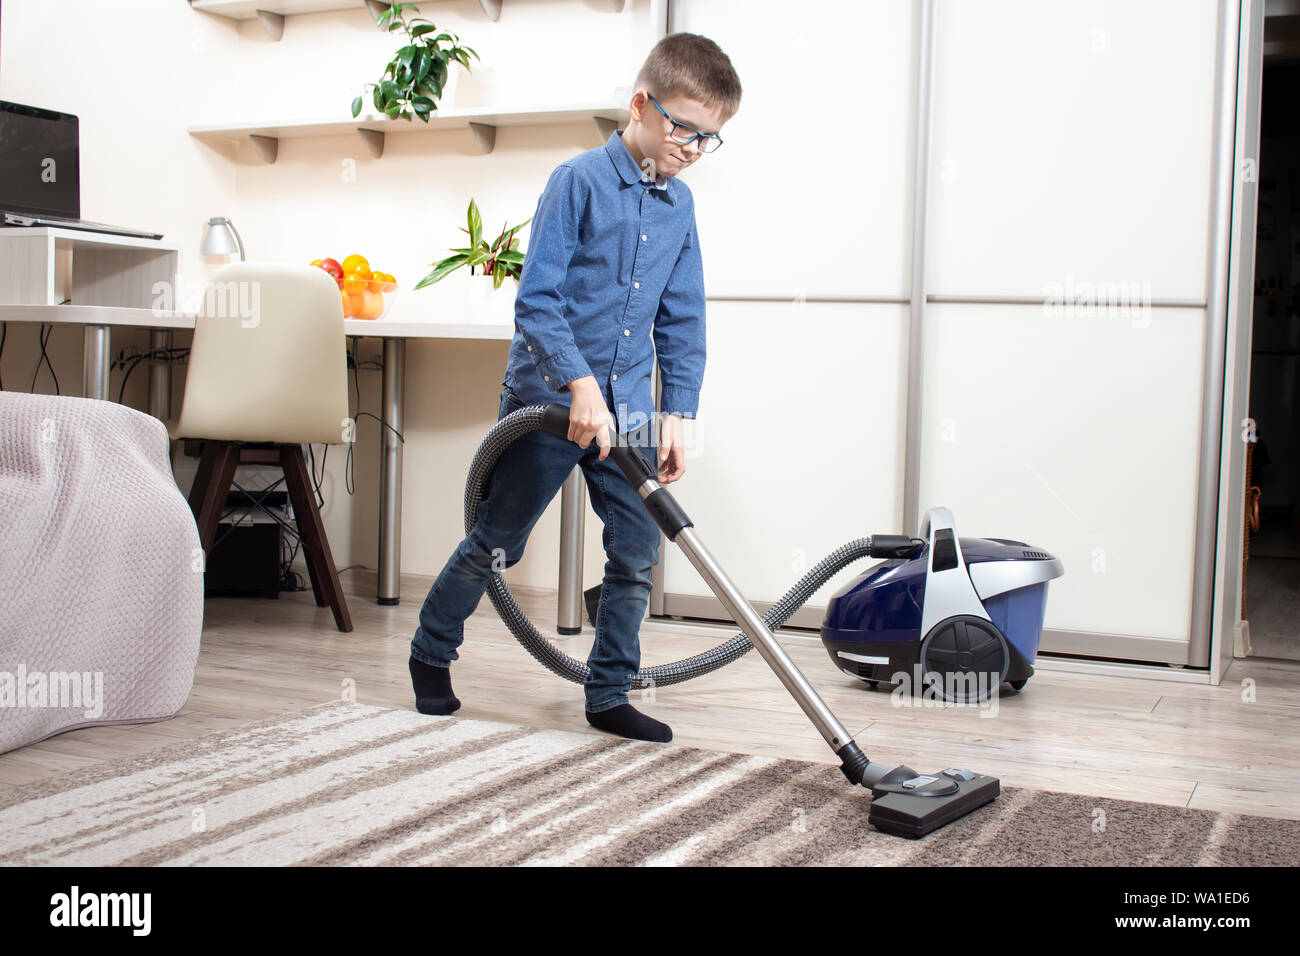 Vacuuming a rug in an apartment by a boy dressed in a blue shirt and jeans pants. Stock Photo